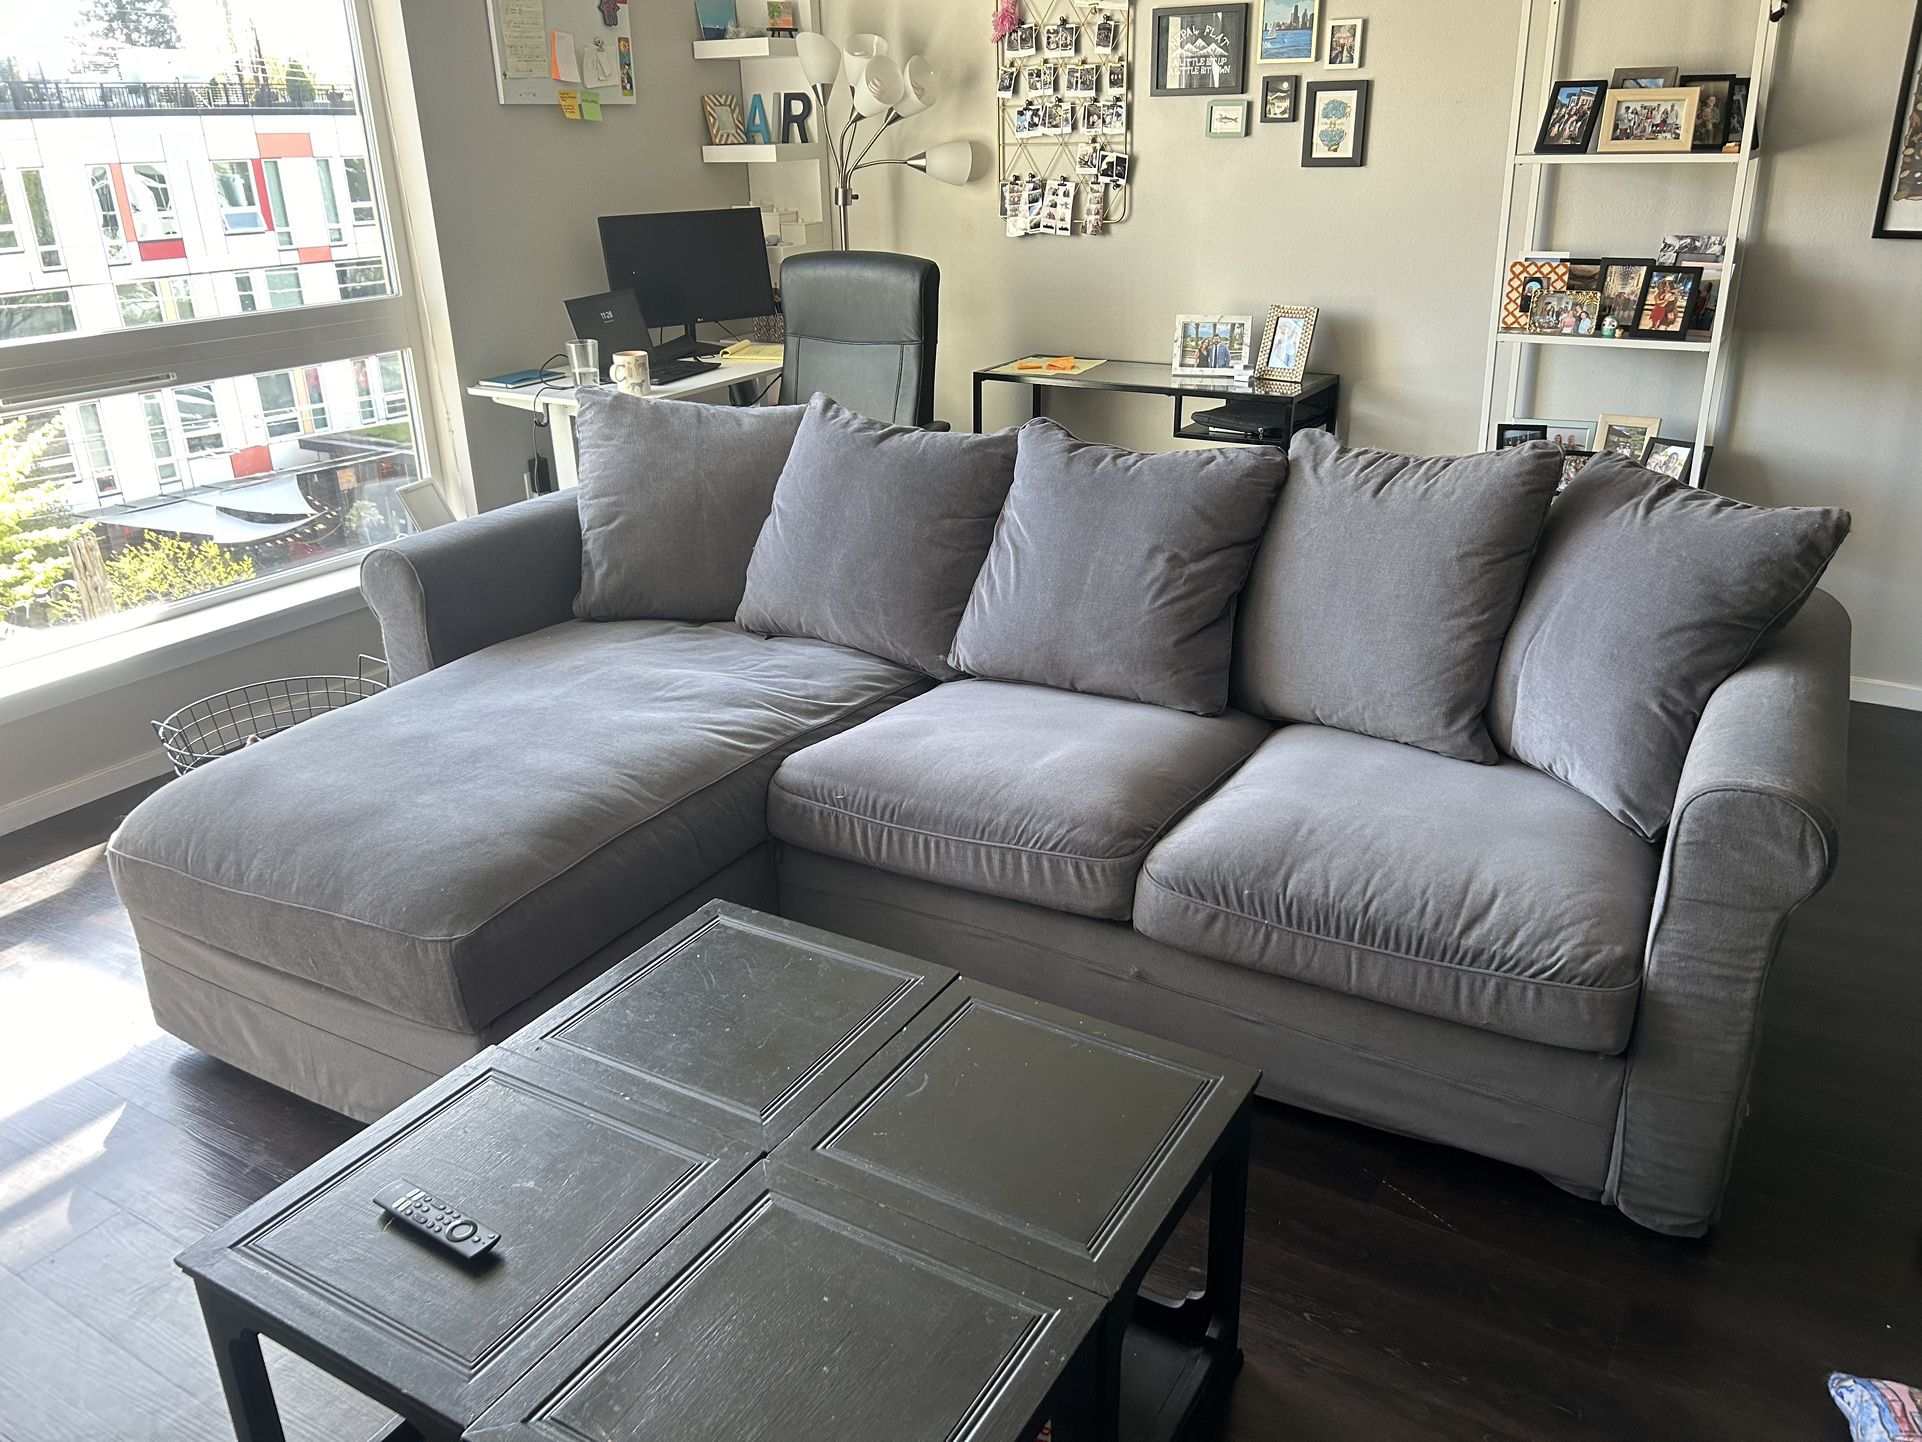 IKEA Grey Sectional Sofa with Storage Under Chaise